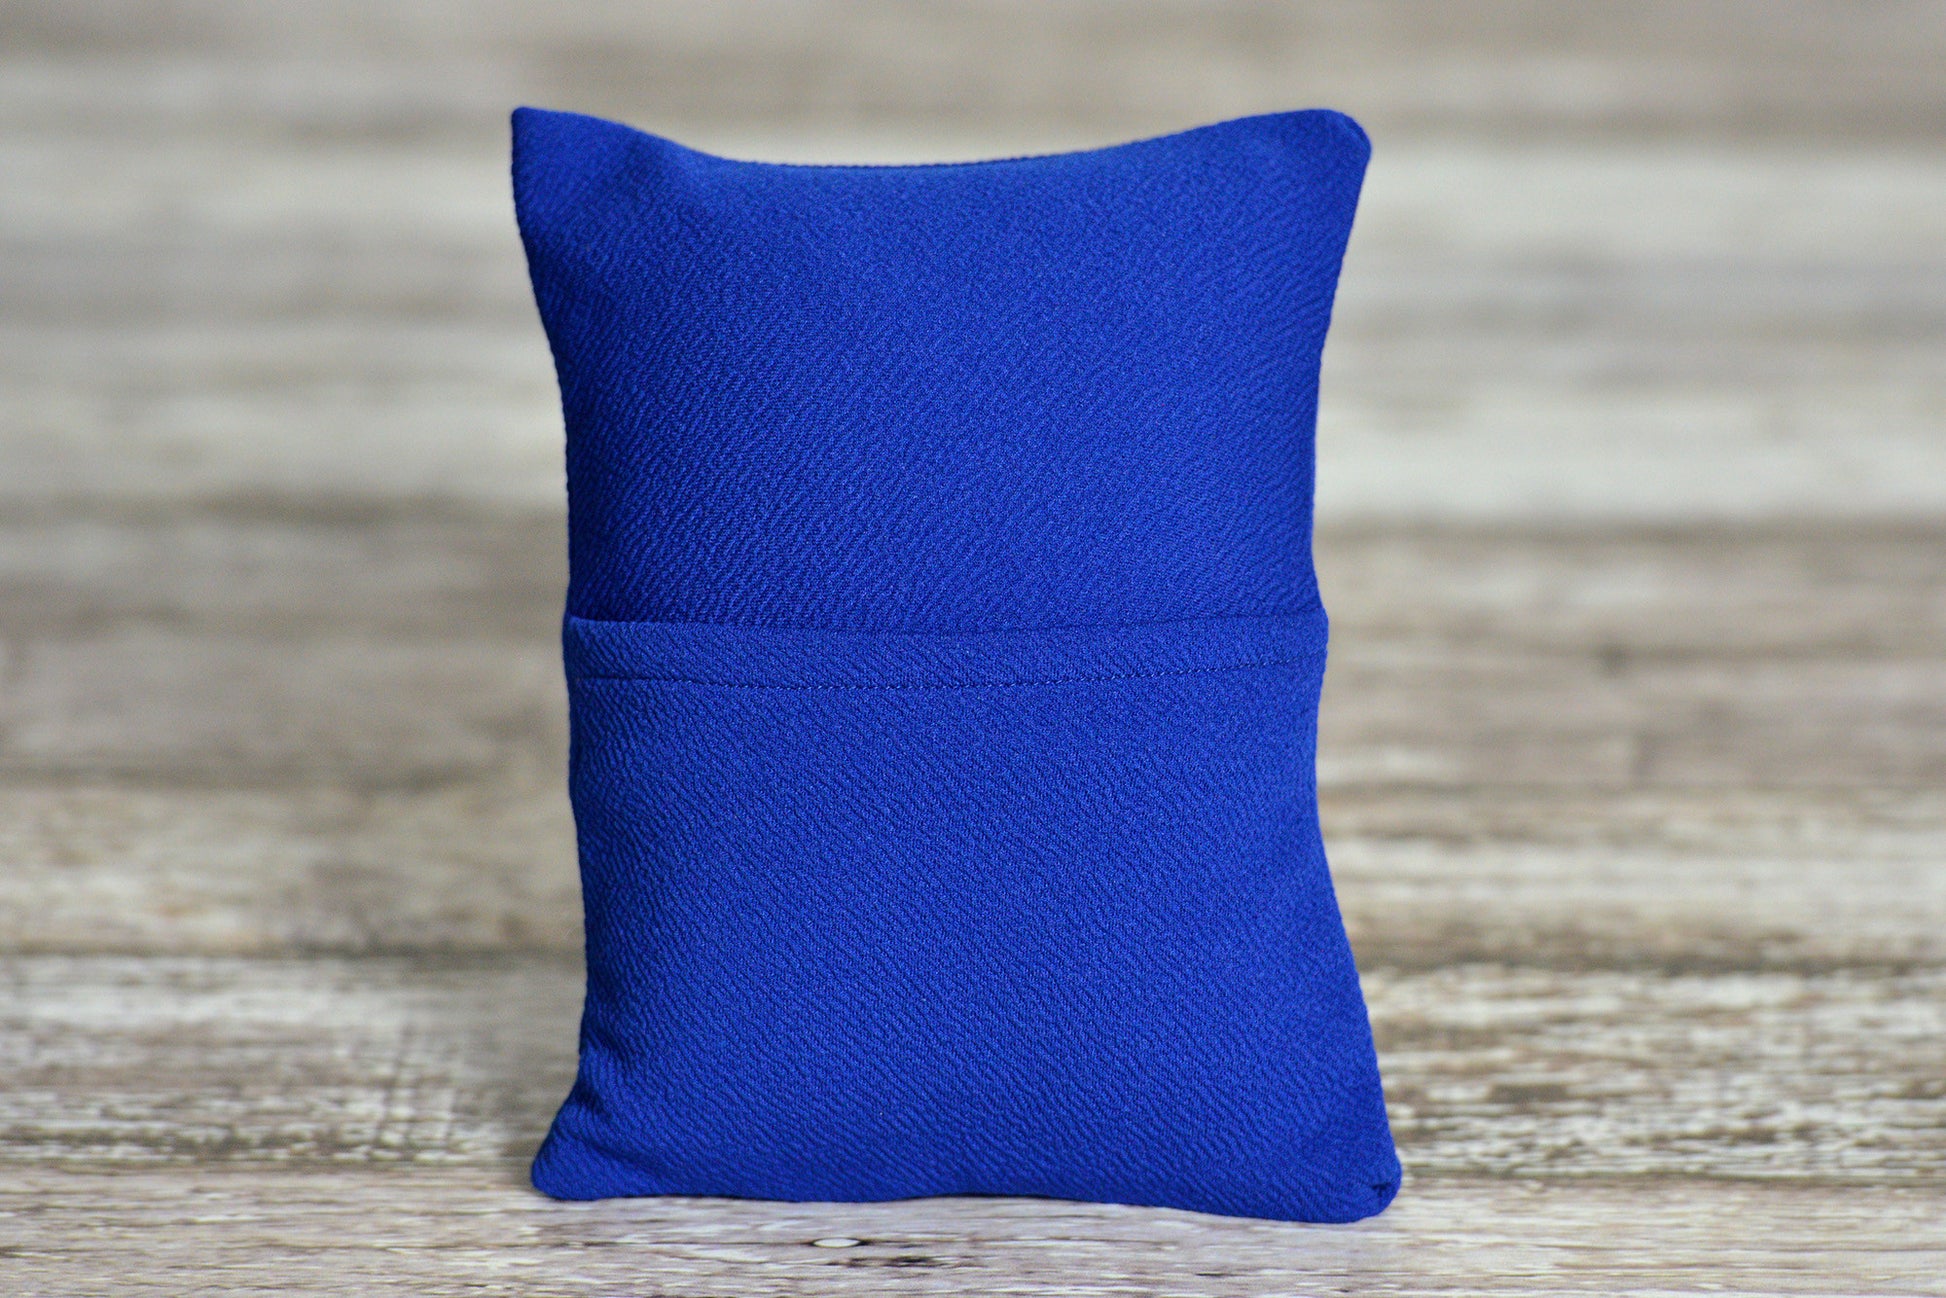 Mini Pillow with Cover - Textured - New Navy-Newborn Photography Props